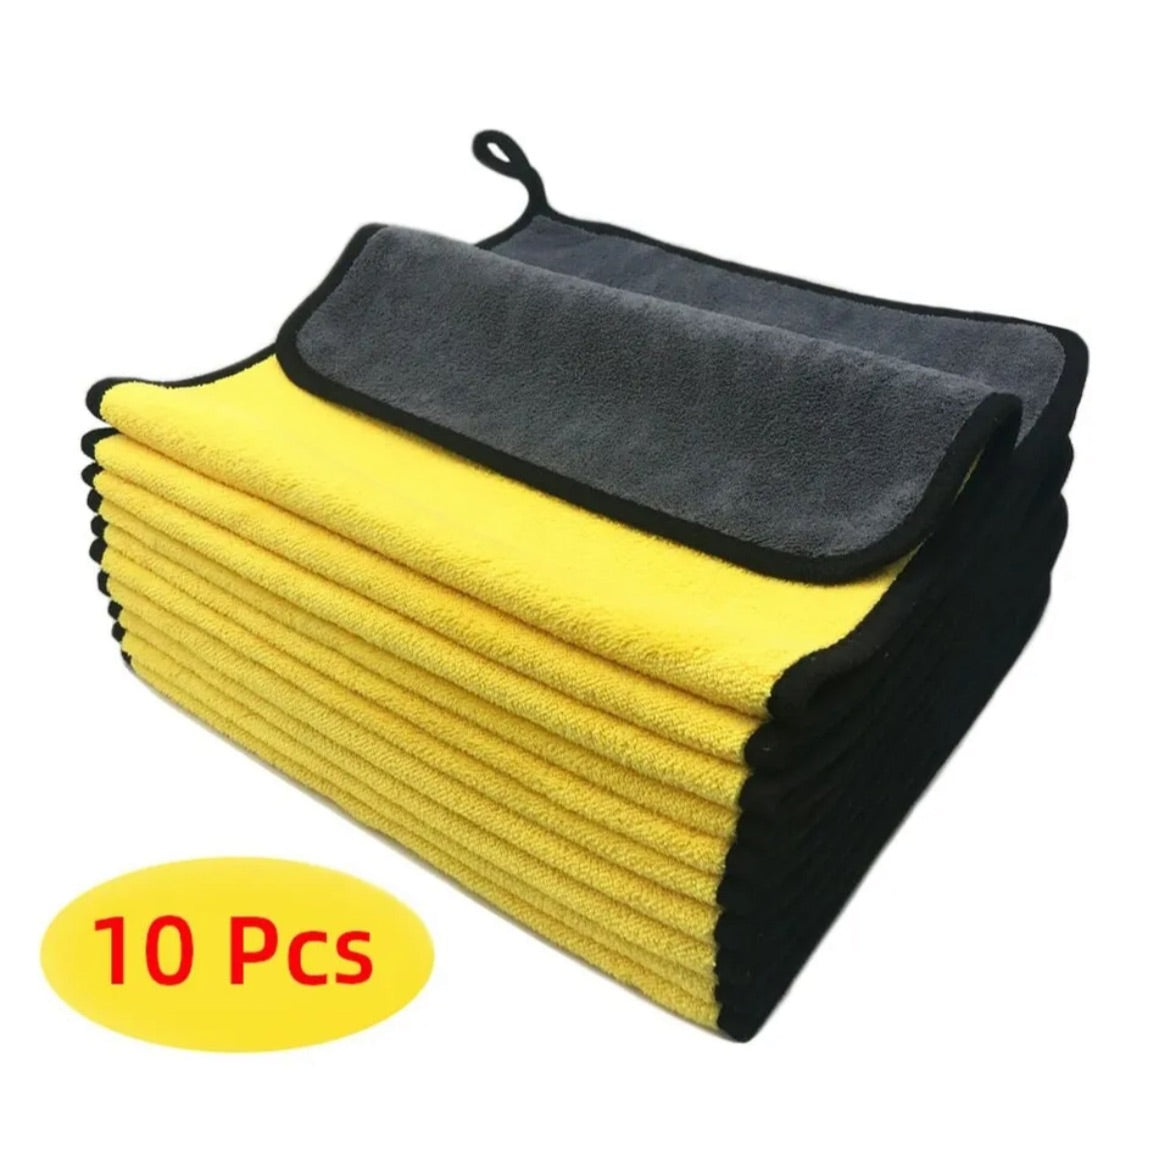 10 Pack Microfiber Wash Towel For Cleaning Drying Cloth Rag Absorbent Soft